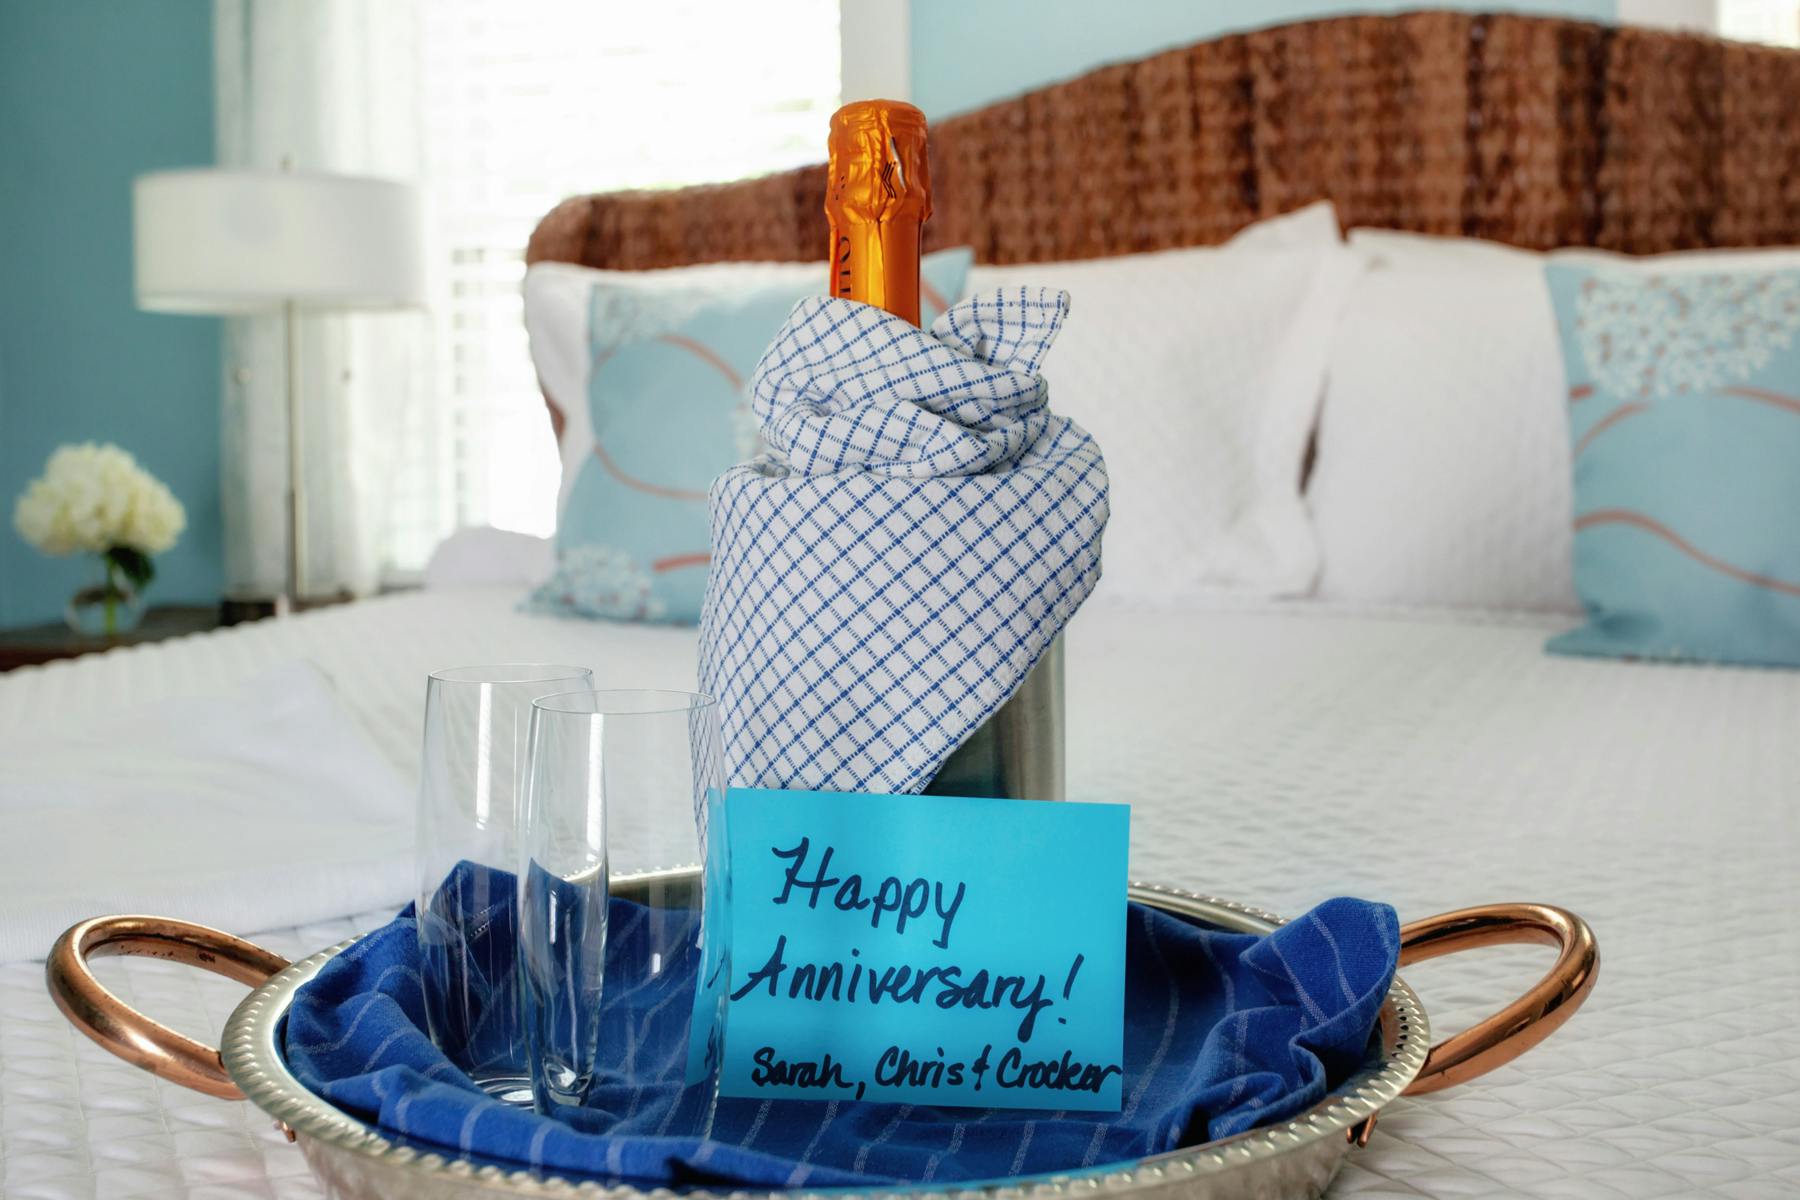 Serving tray on bed with bottle of champagne, two glasses, and card that reads "Happy Anniversary!"